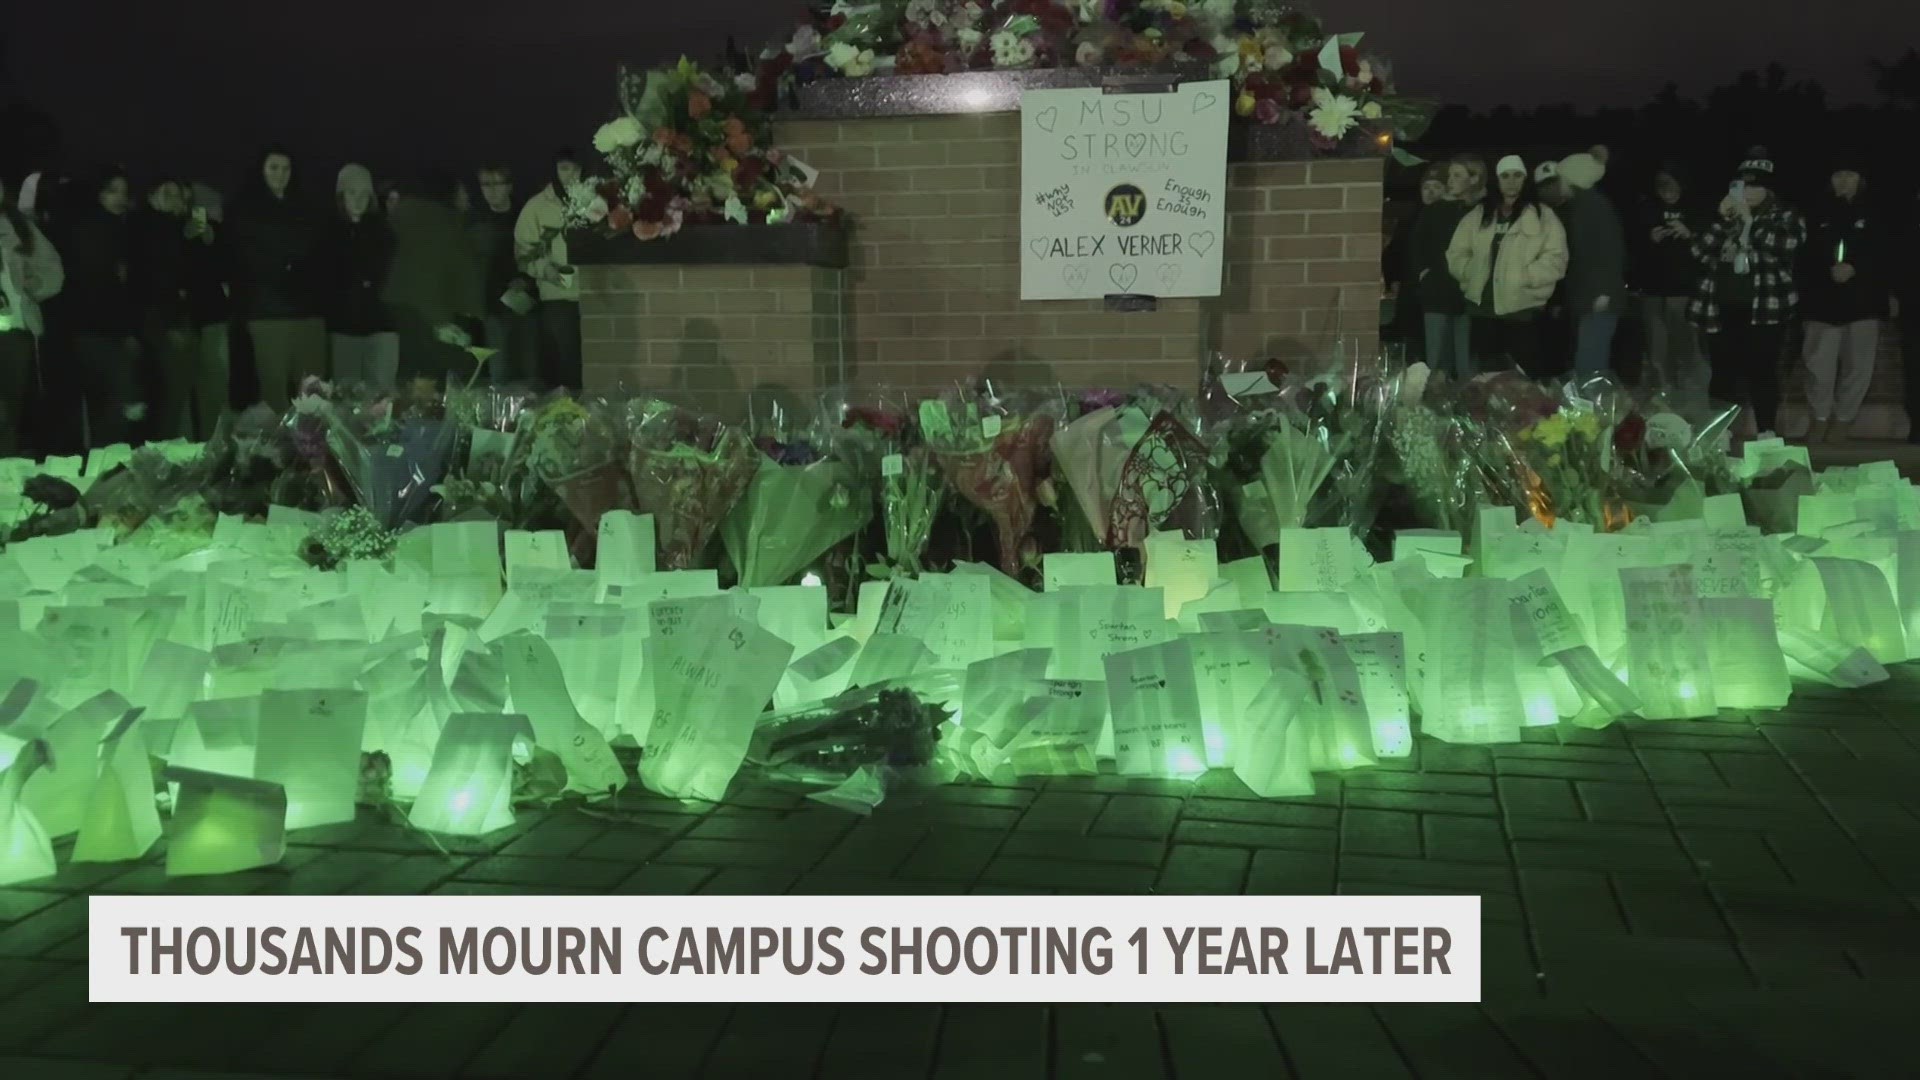 Thousands of students and community members gathered on Michigan State University's campus to remember the lives lost and those hurt in the shooting.